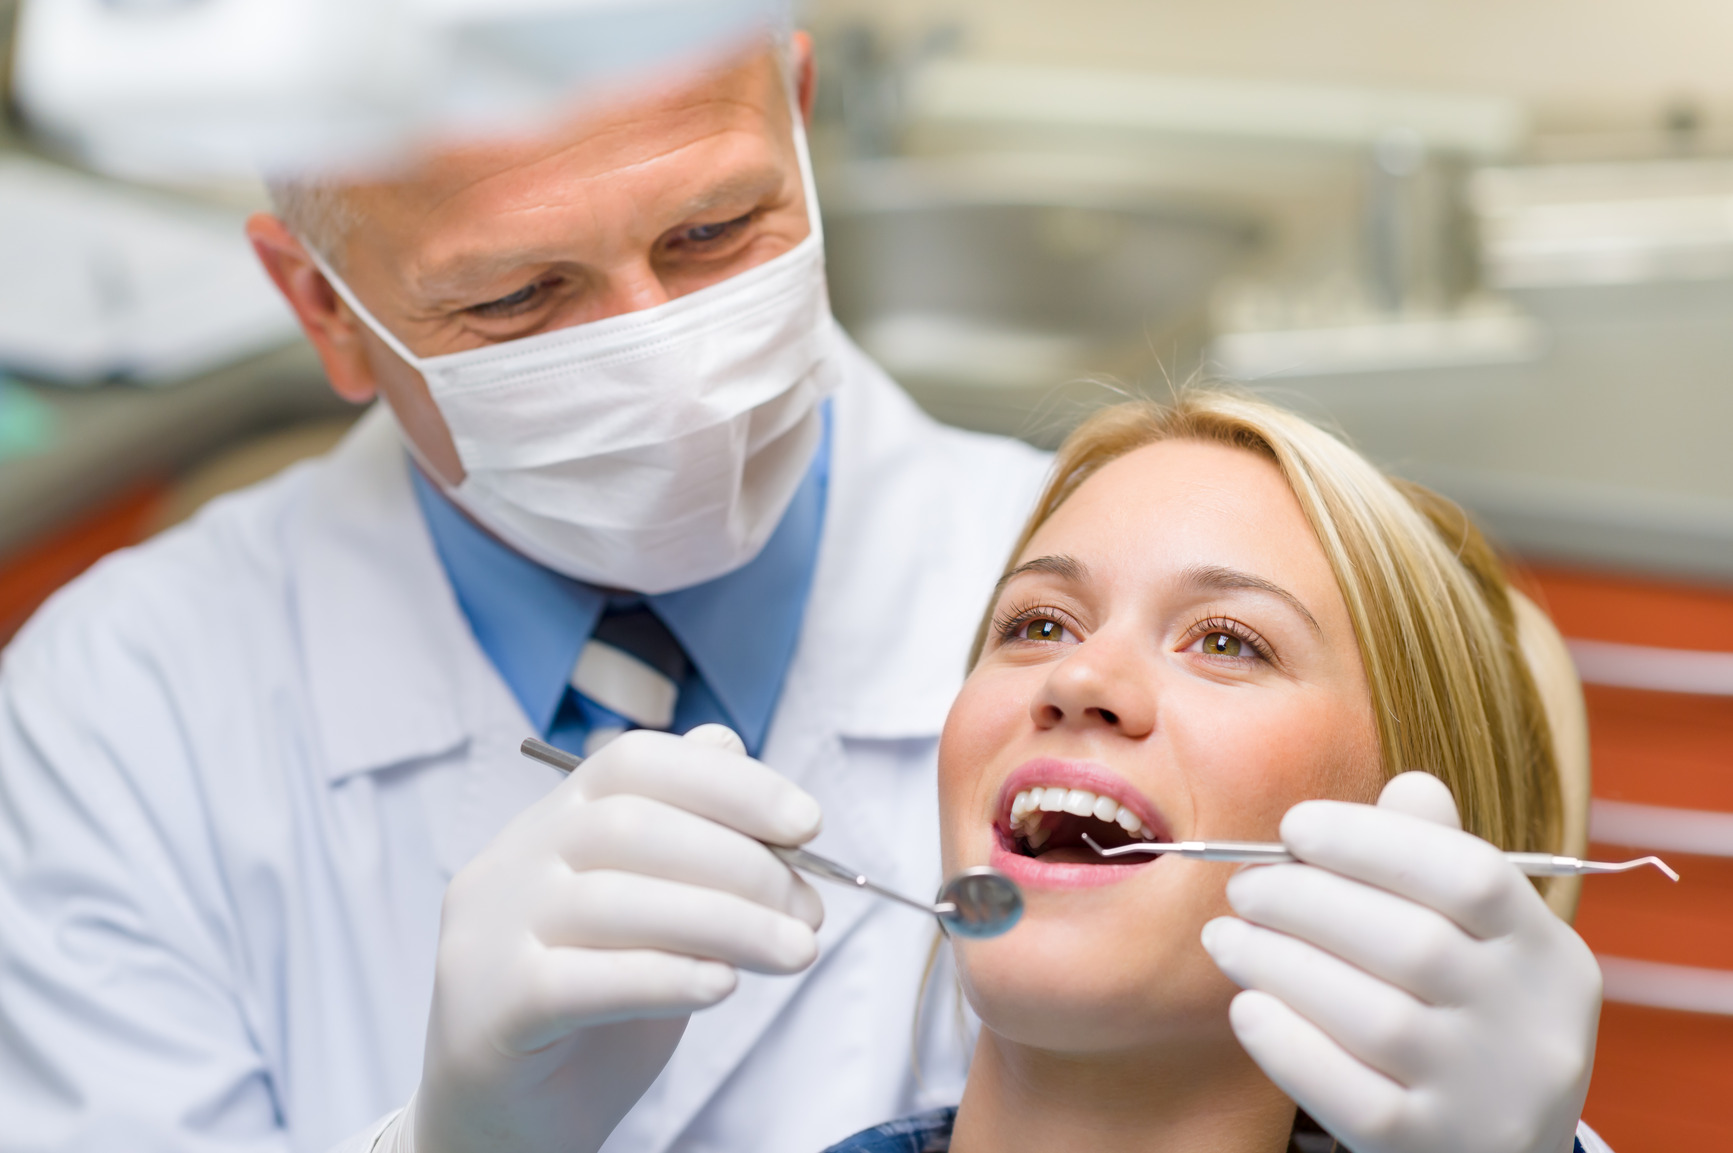 A dentist is examining the teeth of a woman.